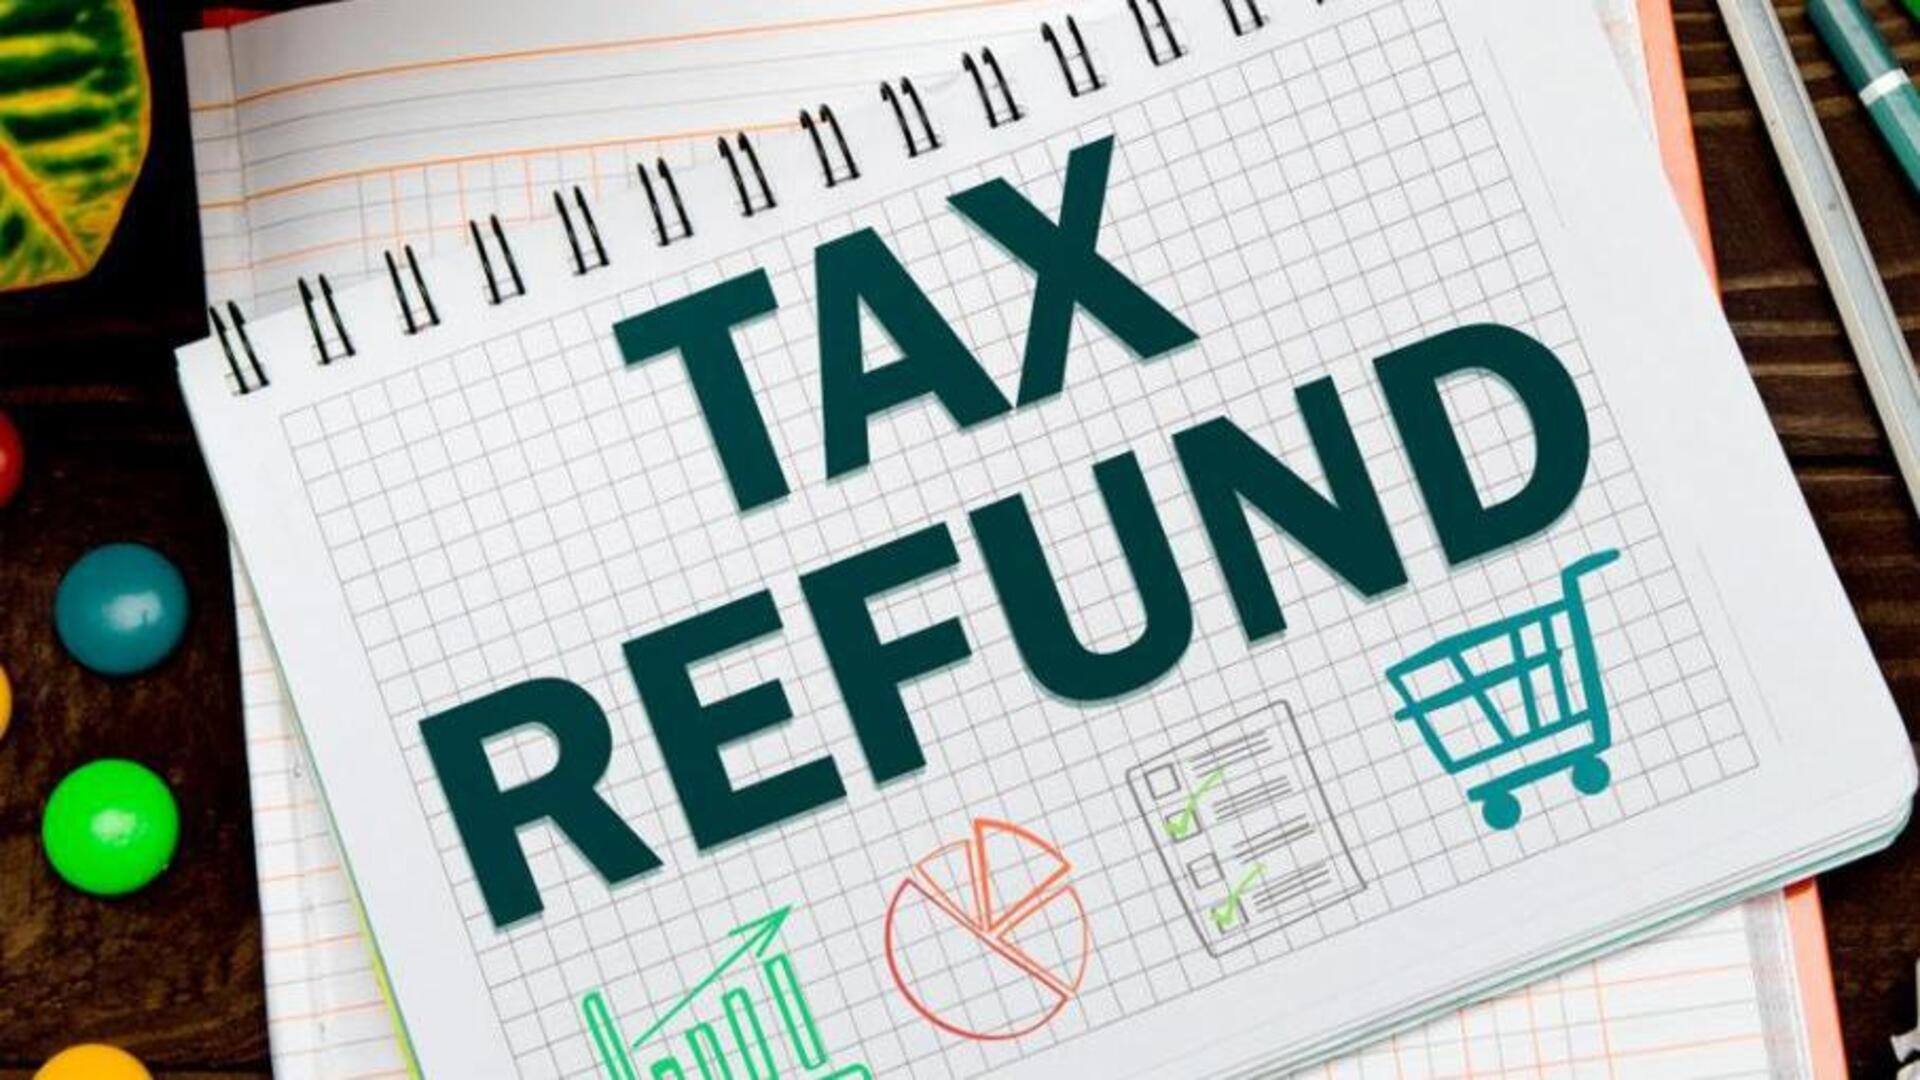 35 lakh income tax refunds delayed in India: Here's why